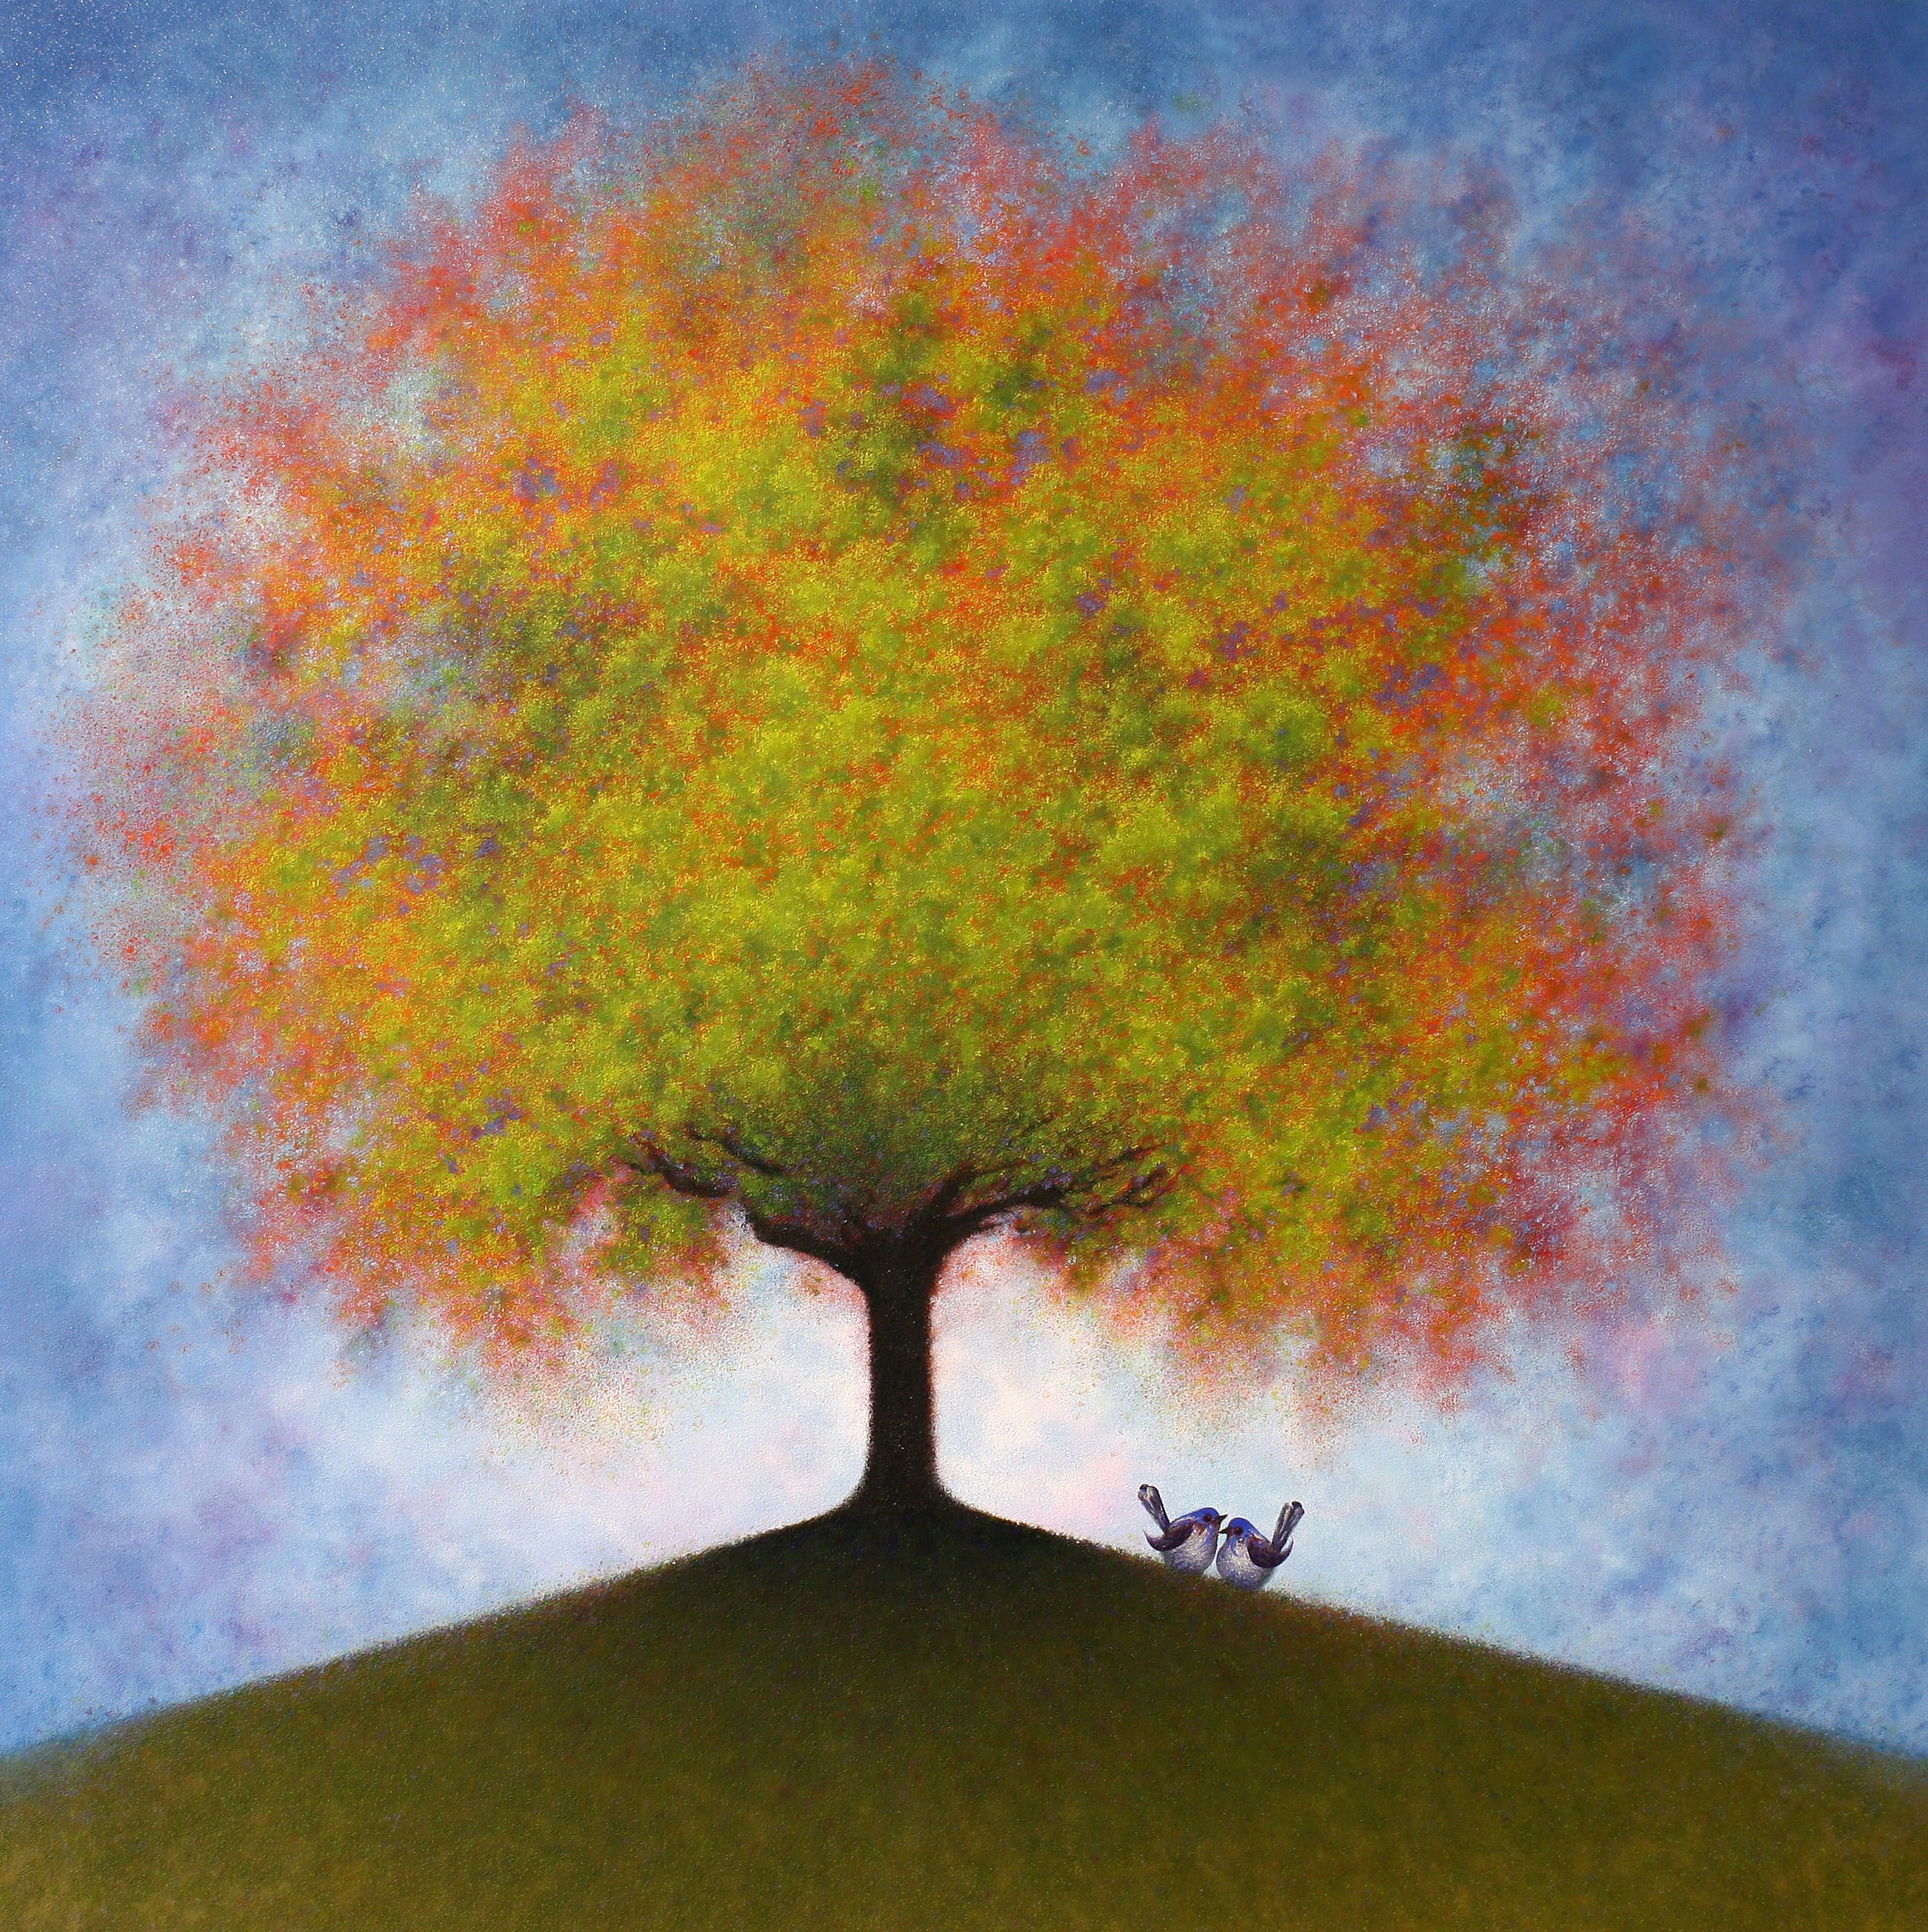 Jac's Tree of Life - painted by Alan Moloney - 102cm x 102cm . Oil on Canvas